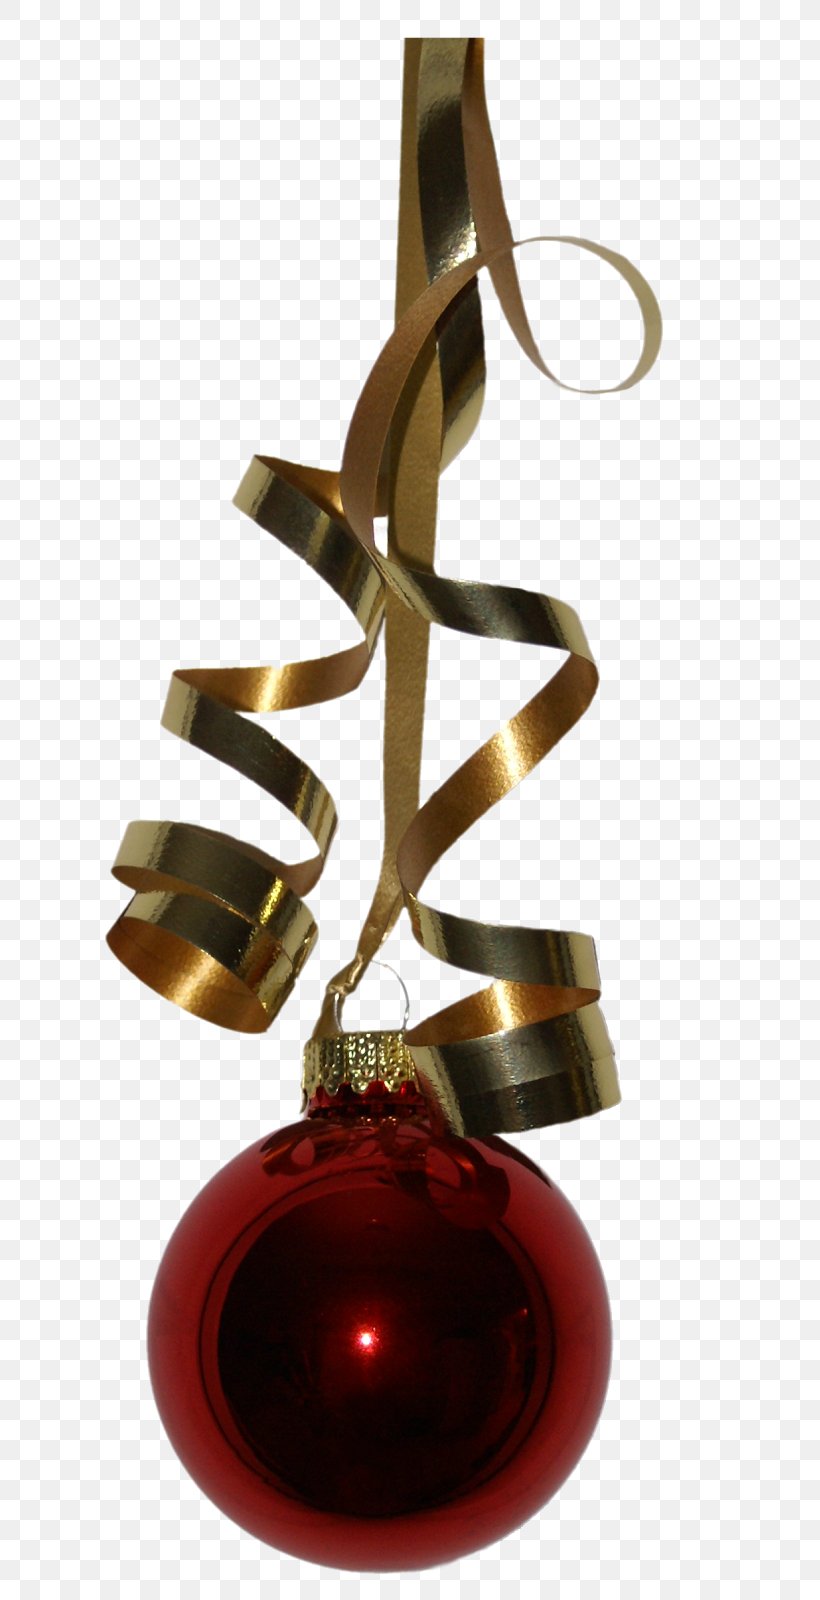 Christmas Ornament Christmas Day Maroon, PNG, 681x1600px, Christmas Ornament, Christmas Day, Christmas Decoration, Maroon Download Free